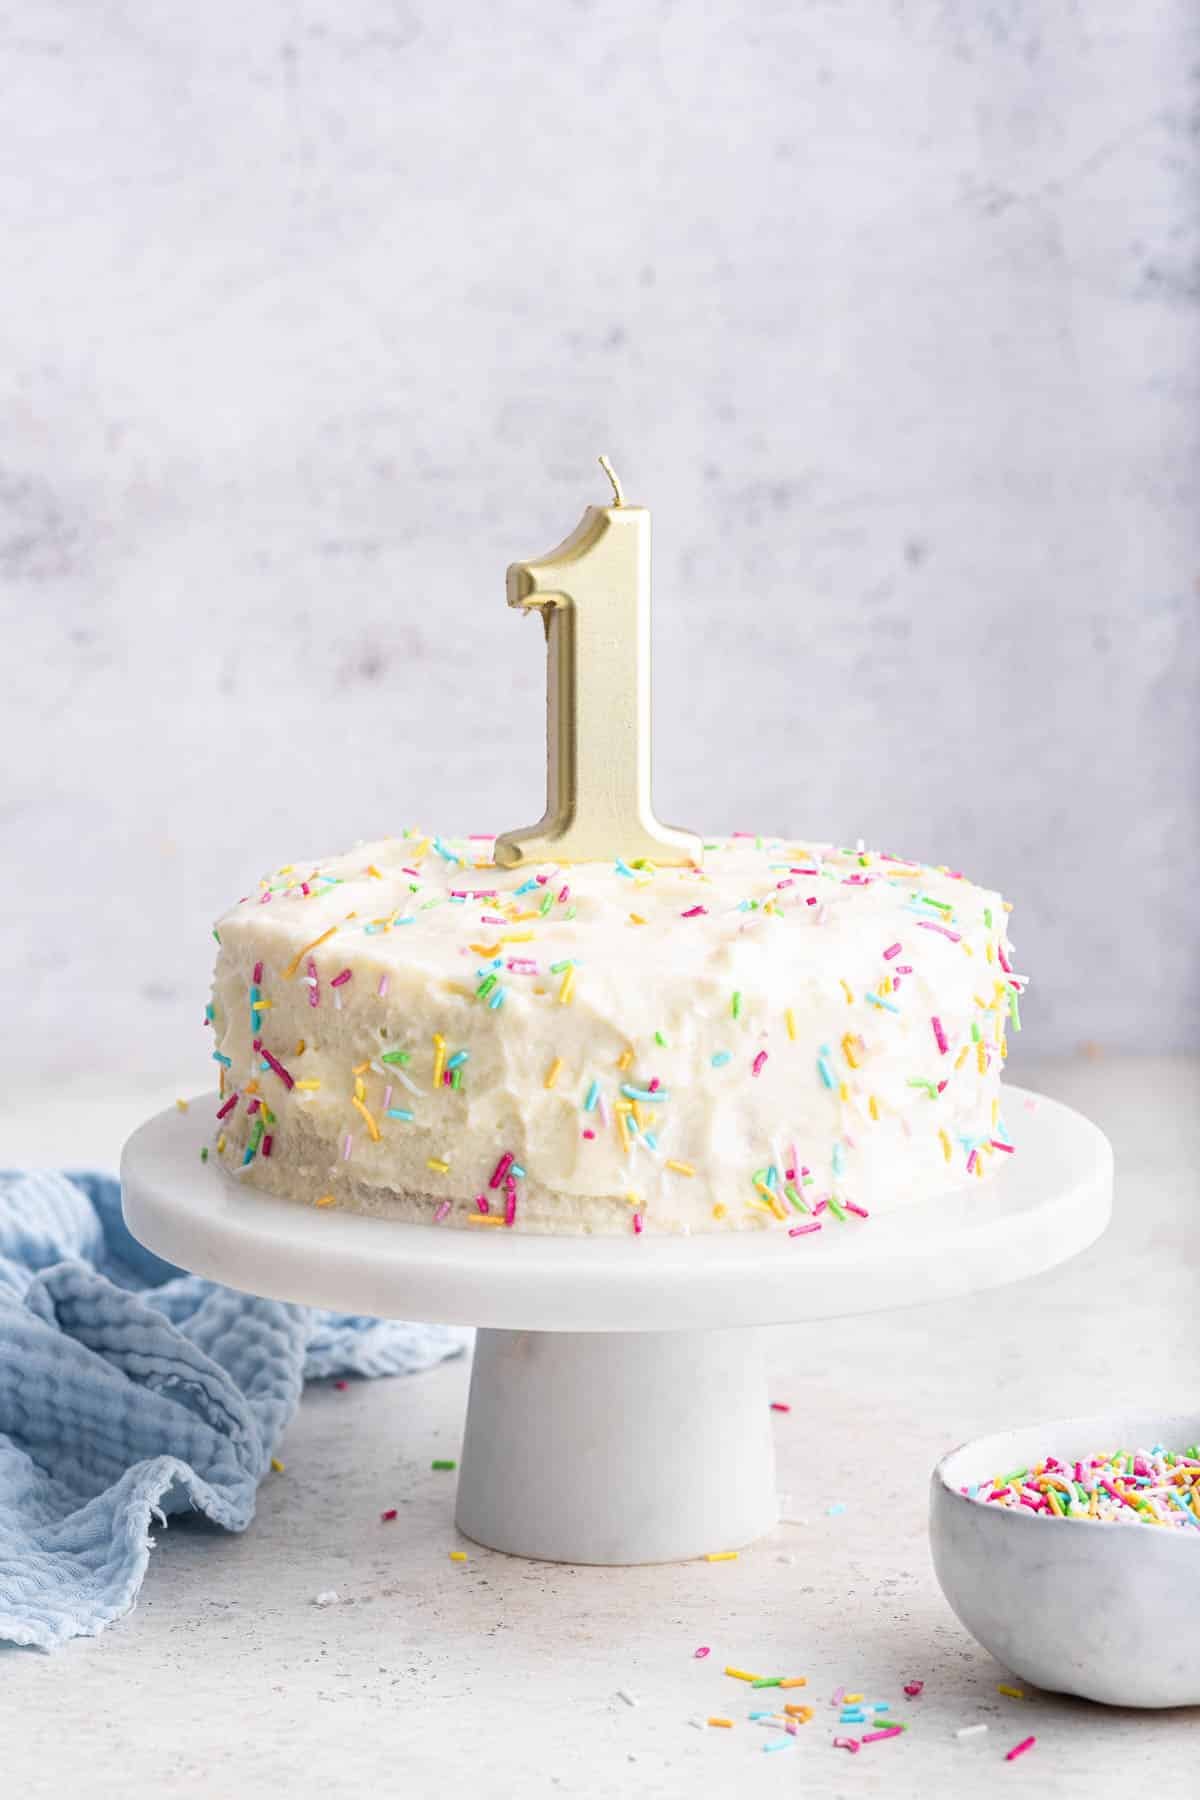 10 Simple Birthday Cake Ideas You Have To See  Mini cakes birthday, Cake,  Simple cake designs